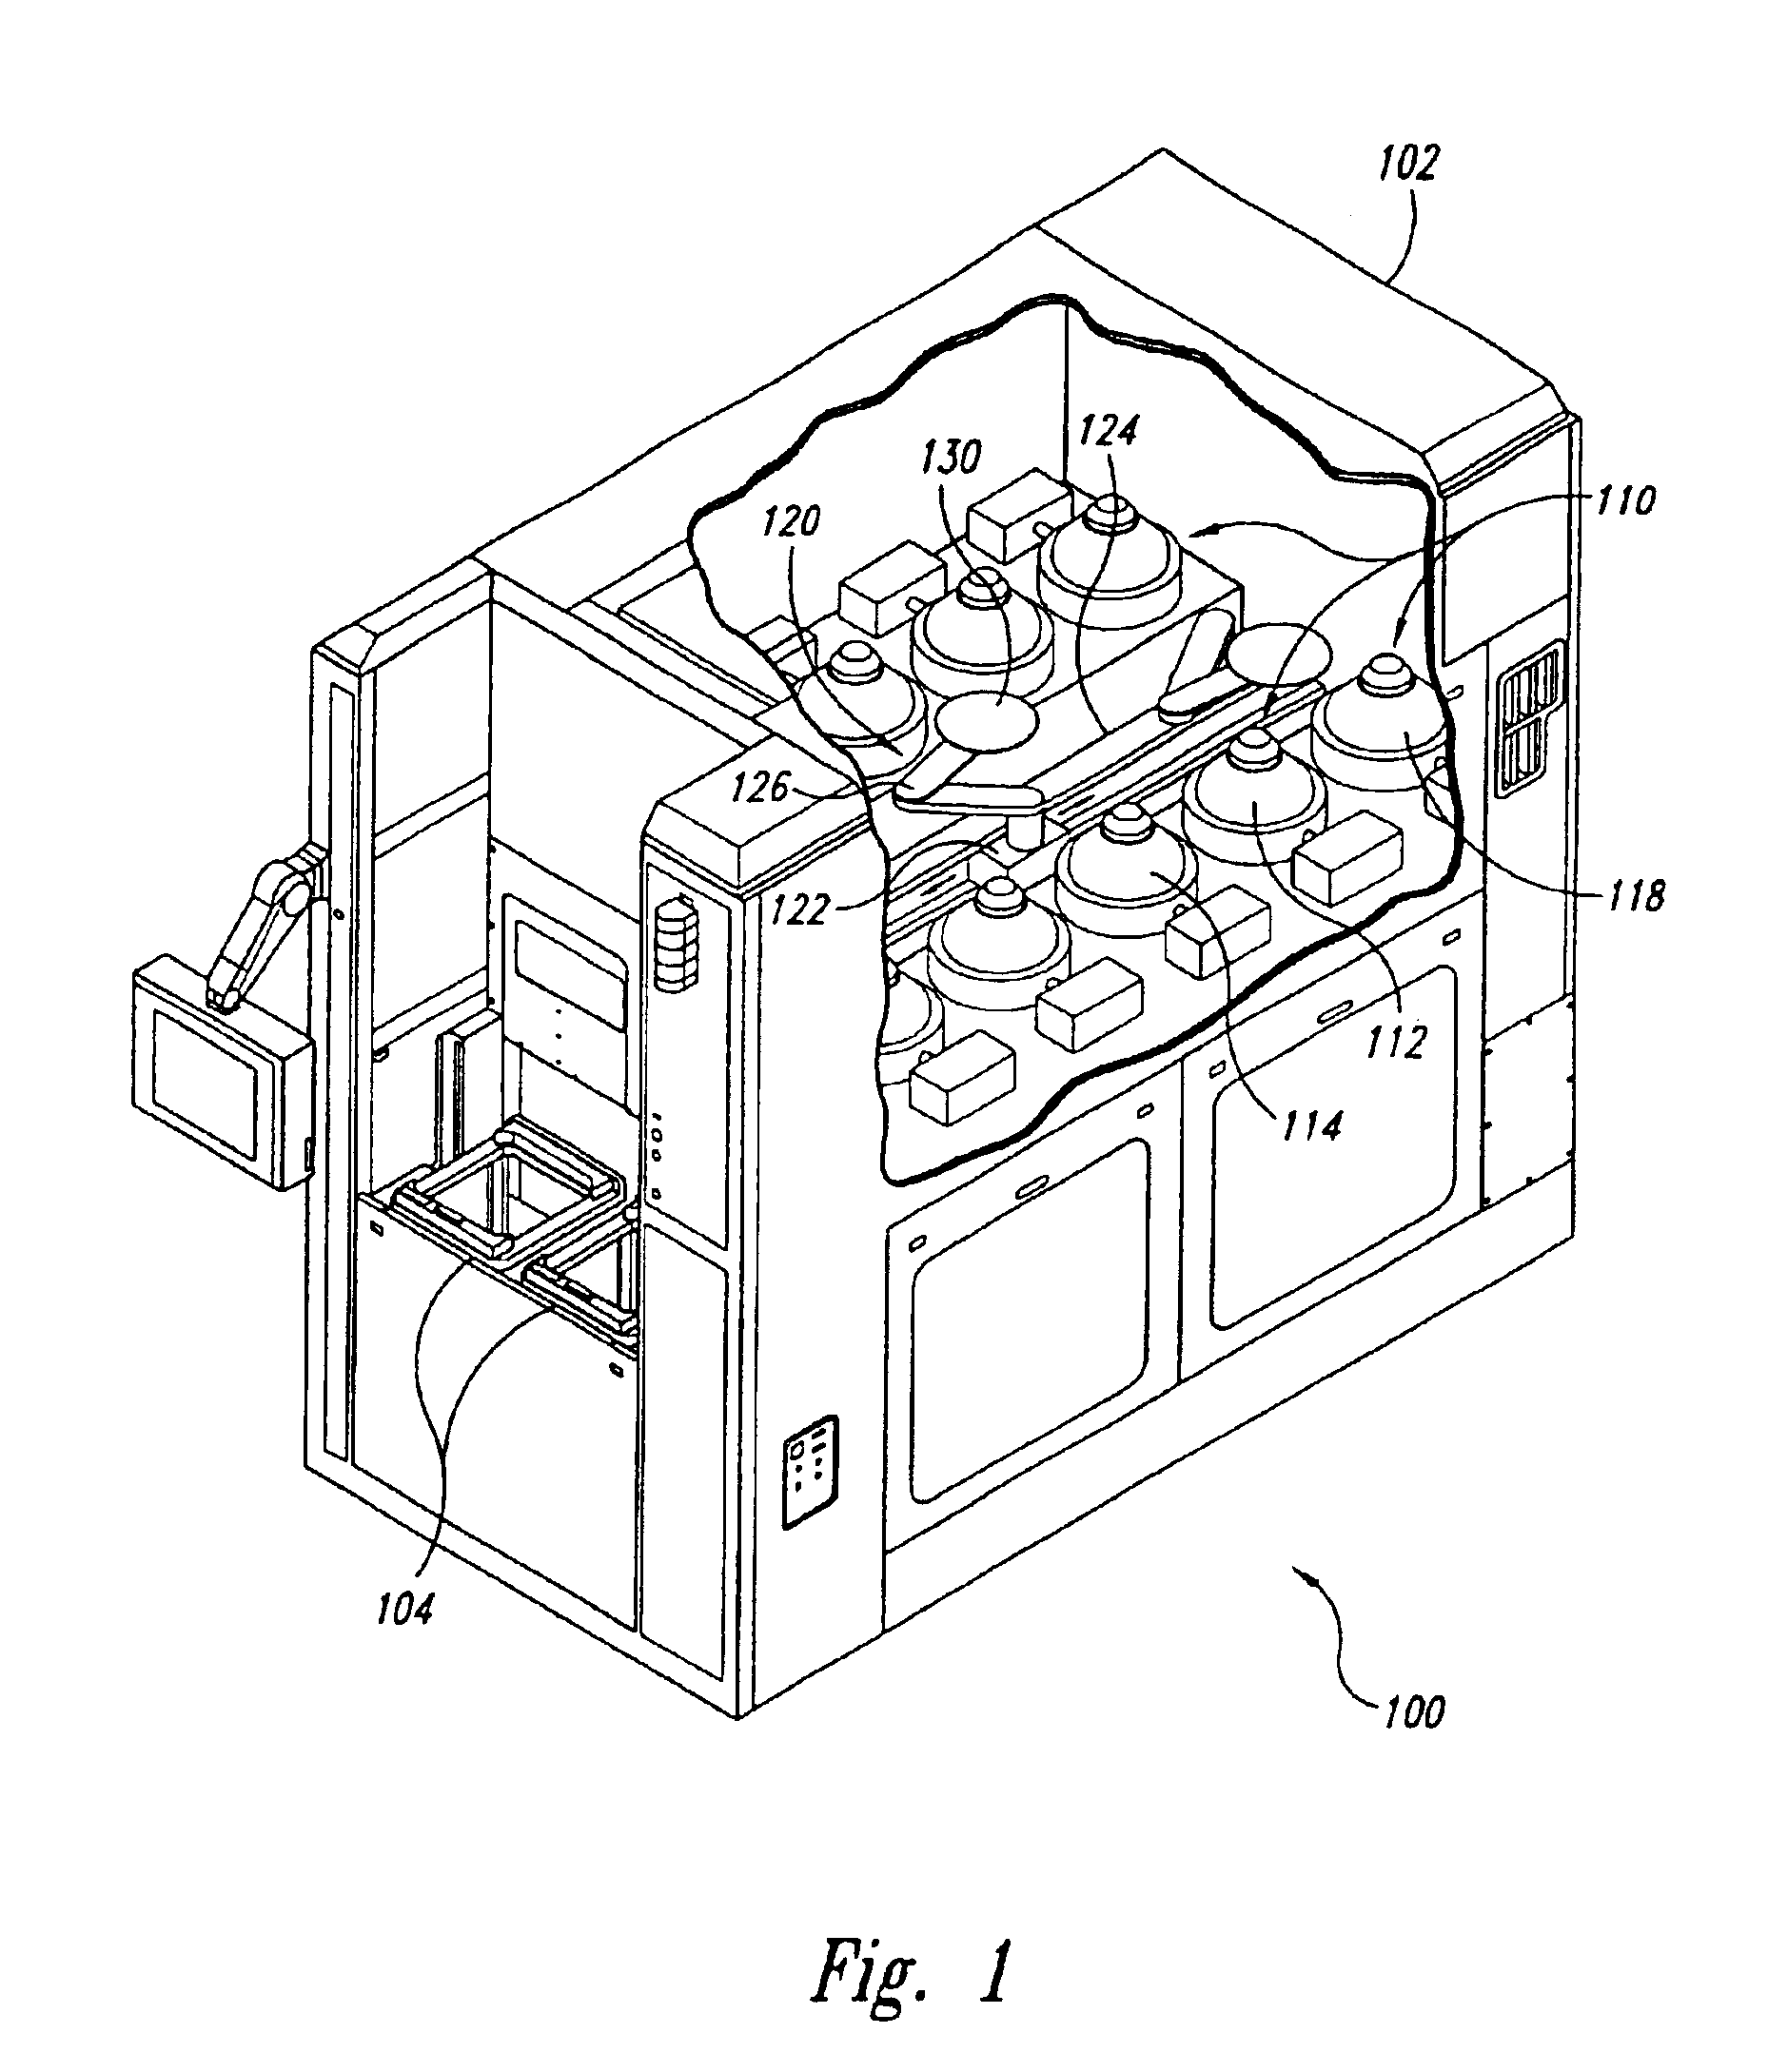 Contact assemblies, methods for making contact assemblies, and plating machines with contact assemblies for plating microelectronic workpieces